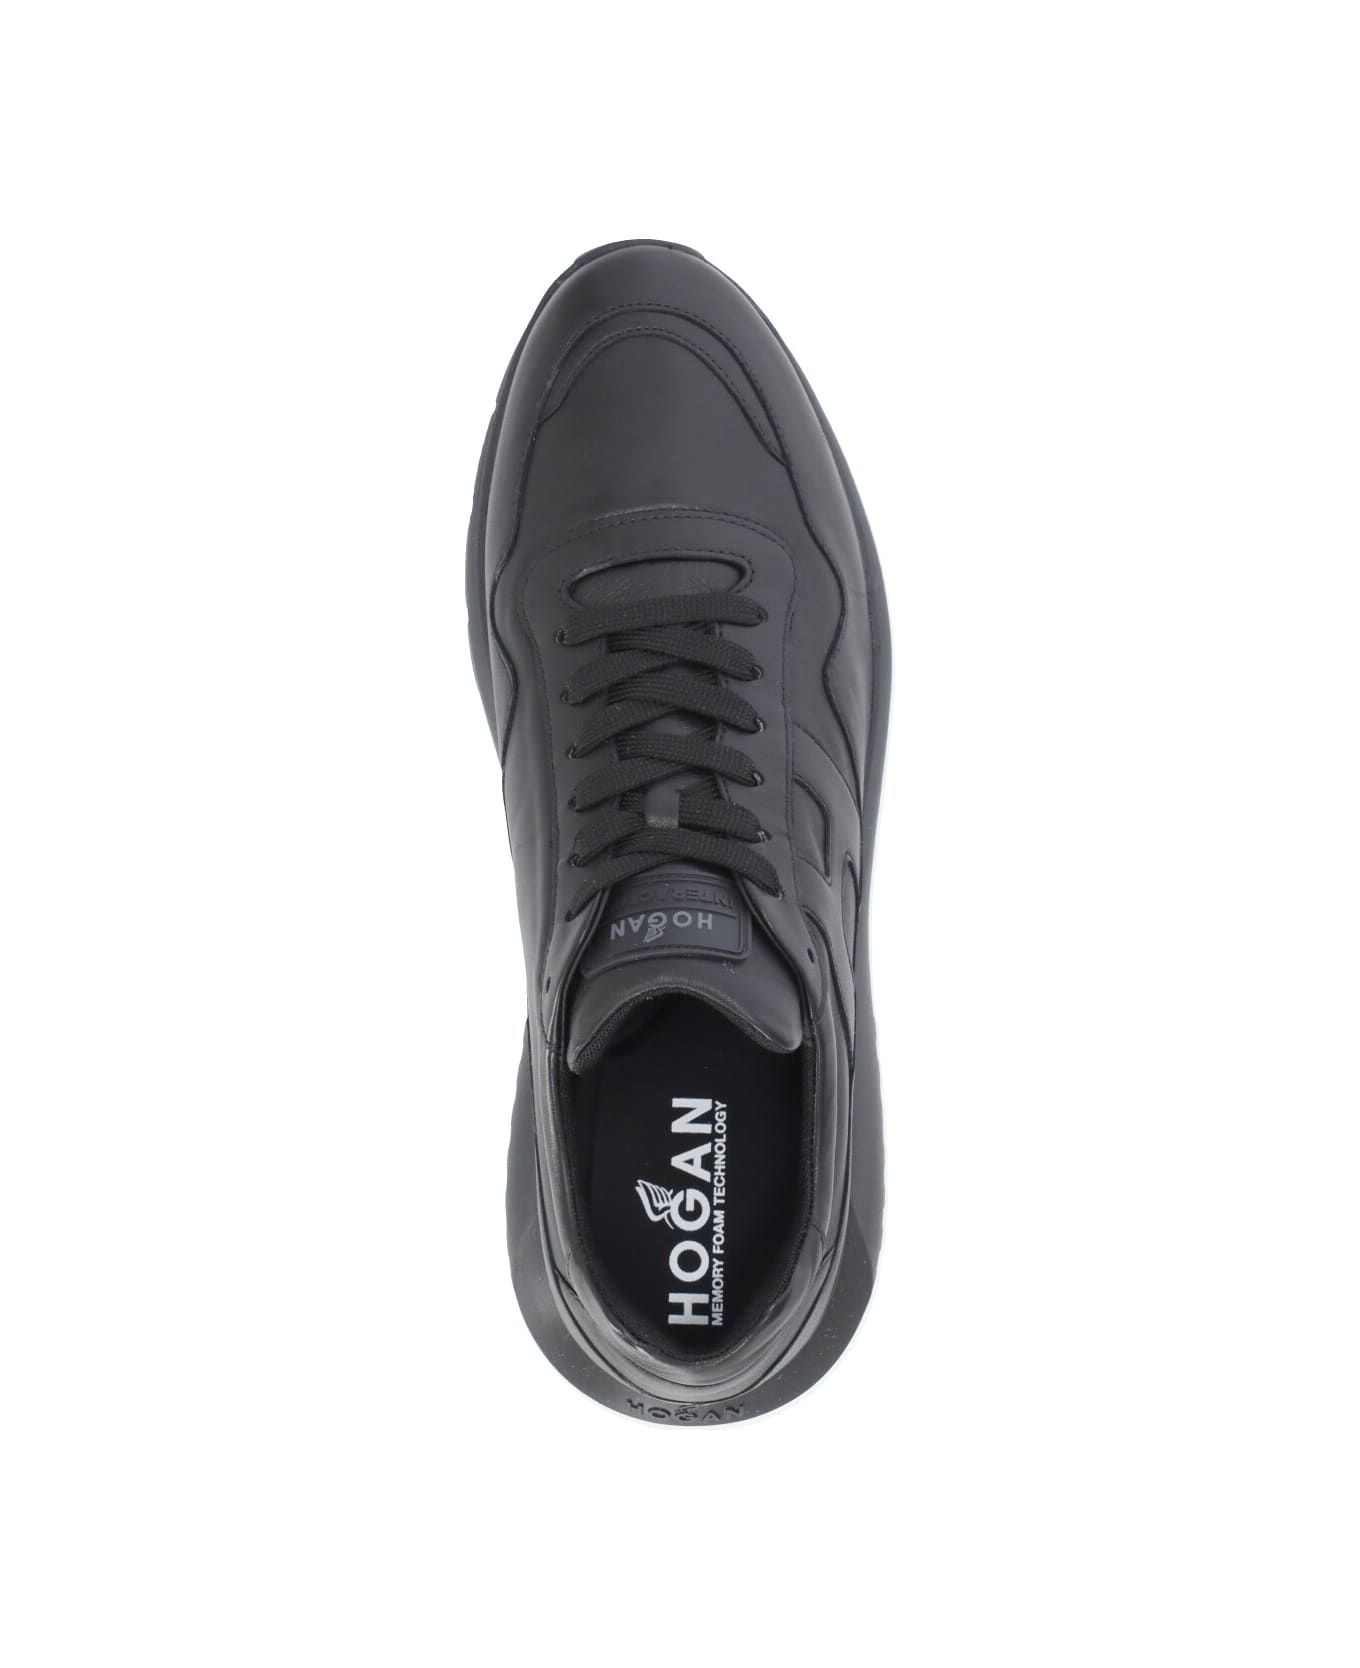 Hogan Sneakers "interactive³" In Leather - Black スニーカー